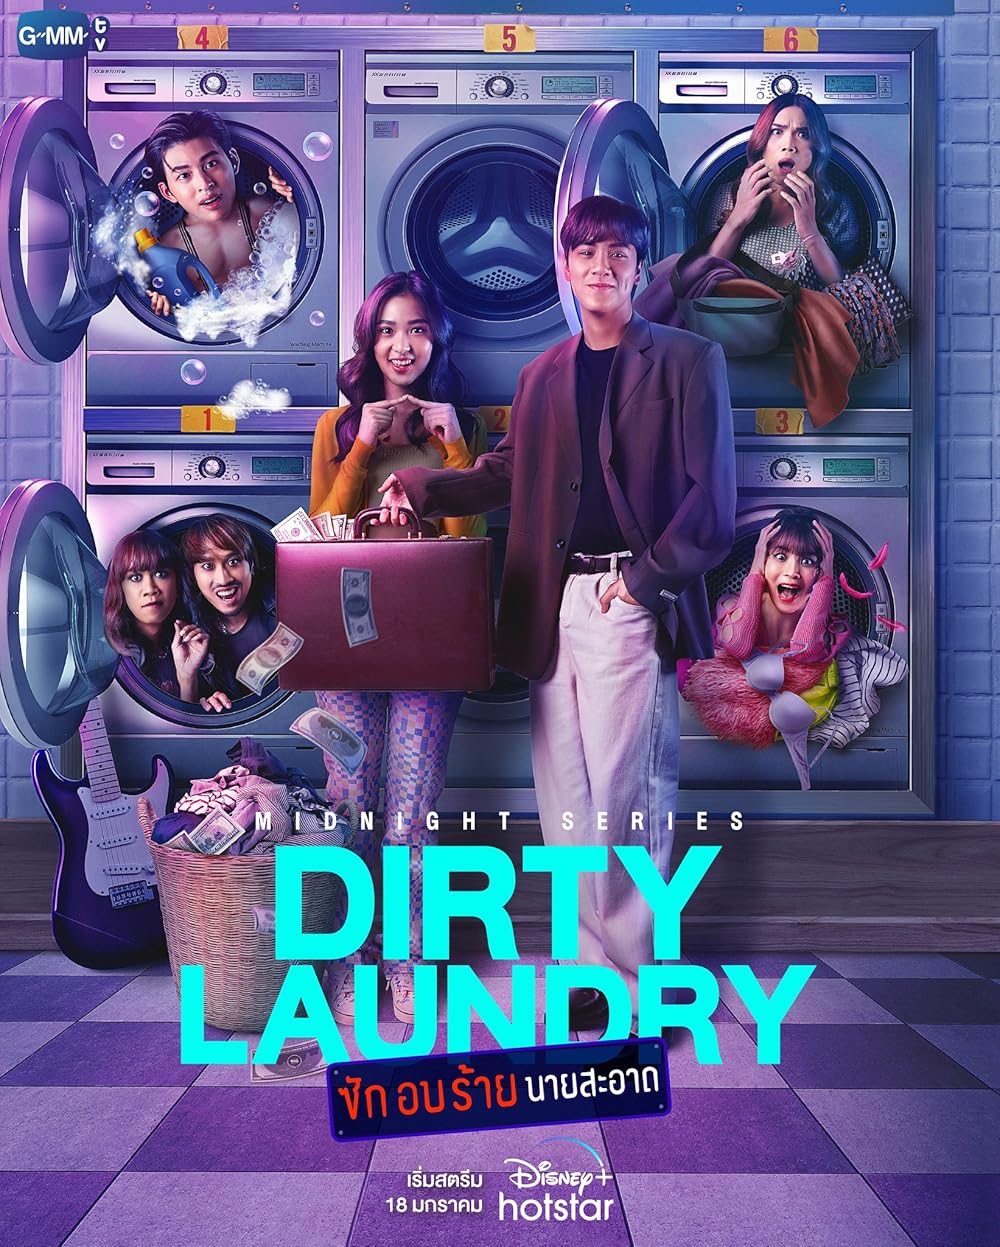 anne jalandoni recommends Dirty Laundry Episode 2